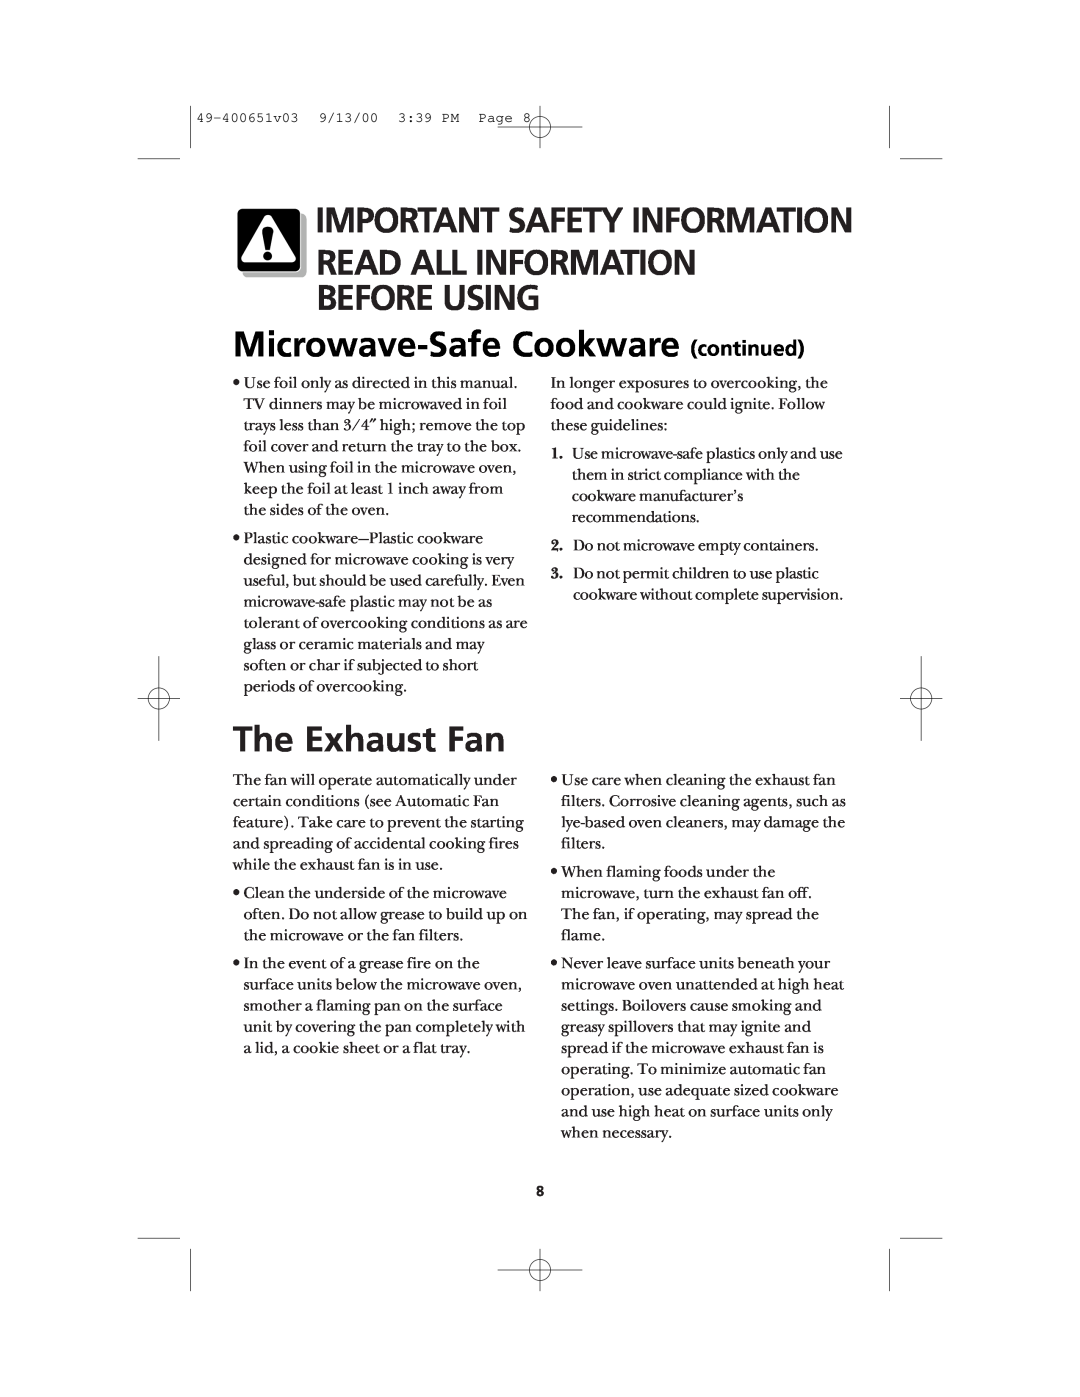 Frigidaire FMT148 warranty Microwave-Safe Cookware continued, The Exhaust Fan, Read All Information Before Using 